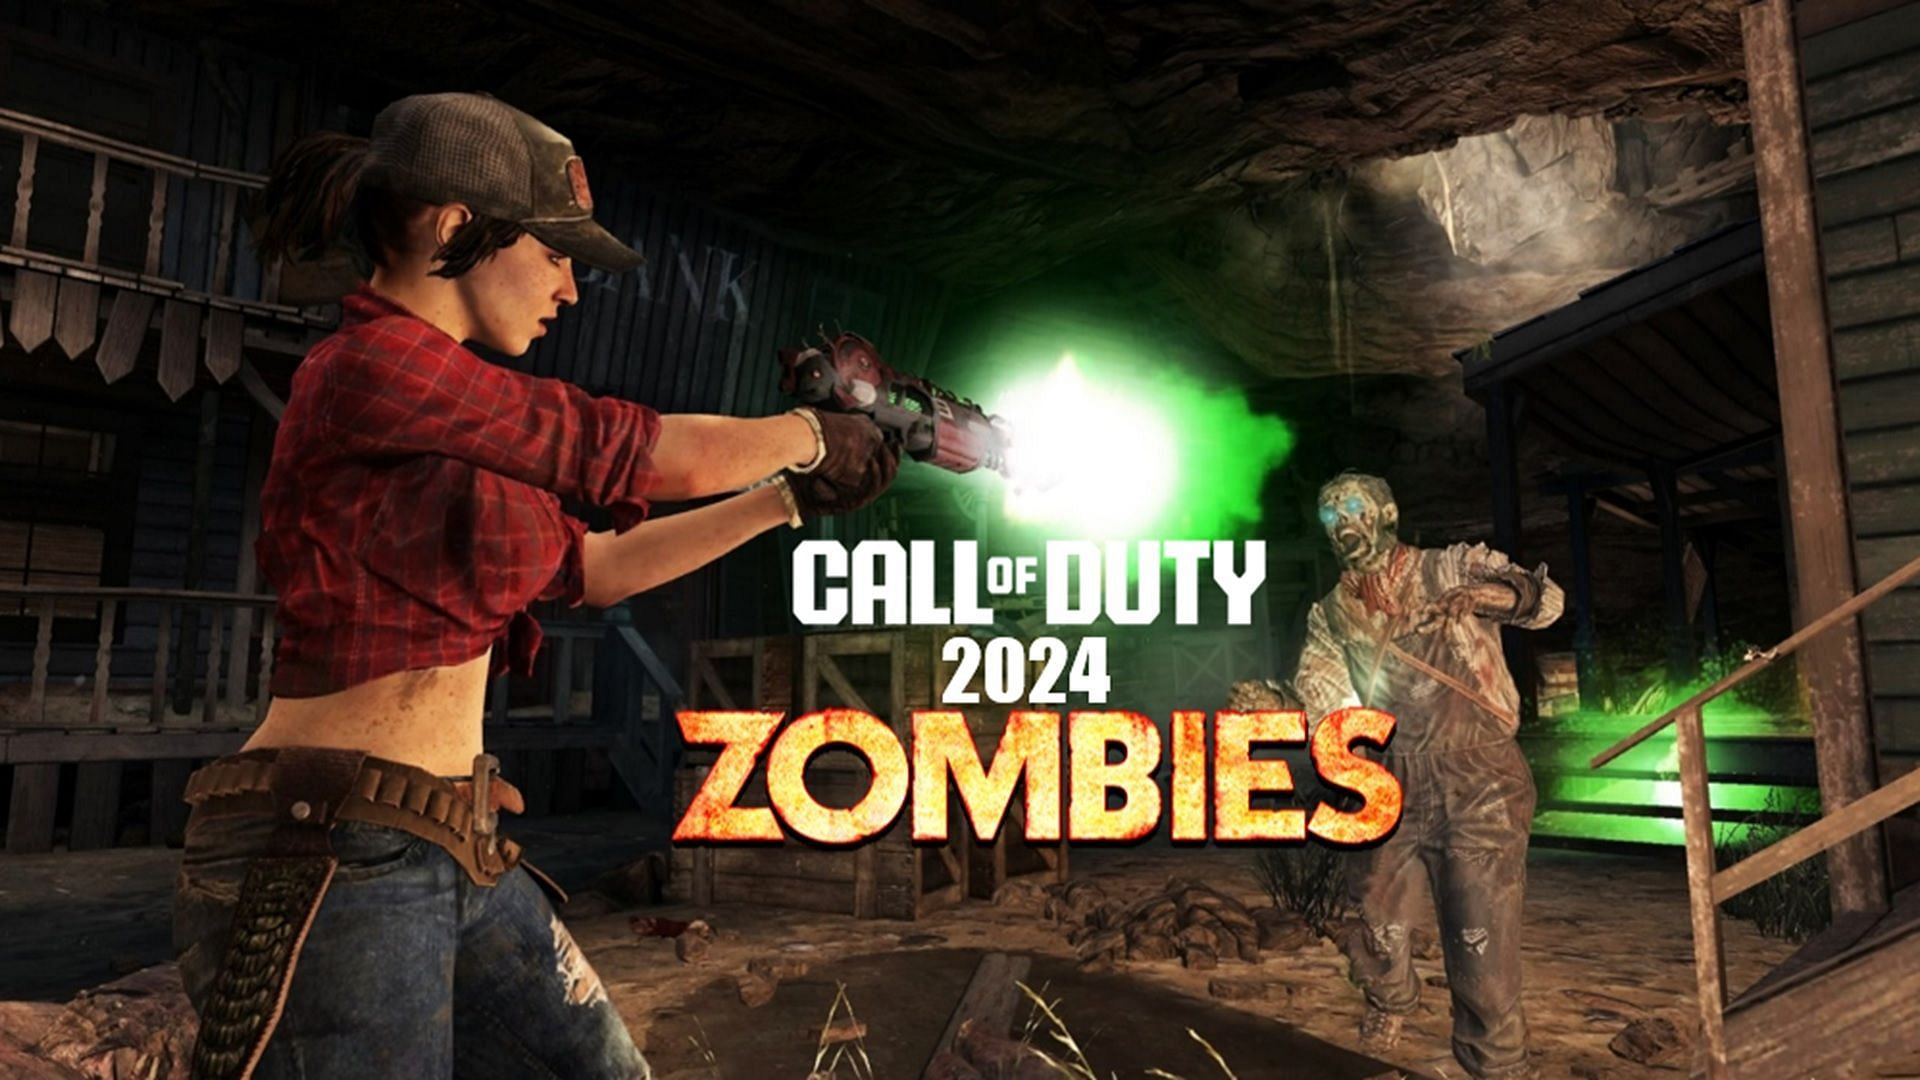 CoD 2024 Zombies is rumored to bring back an iconic map from Black Ops 2 in a remastered form